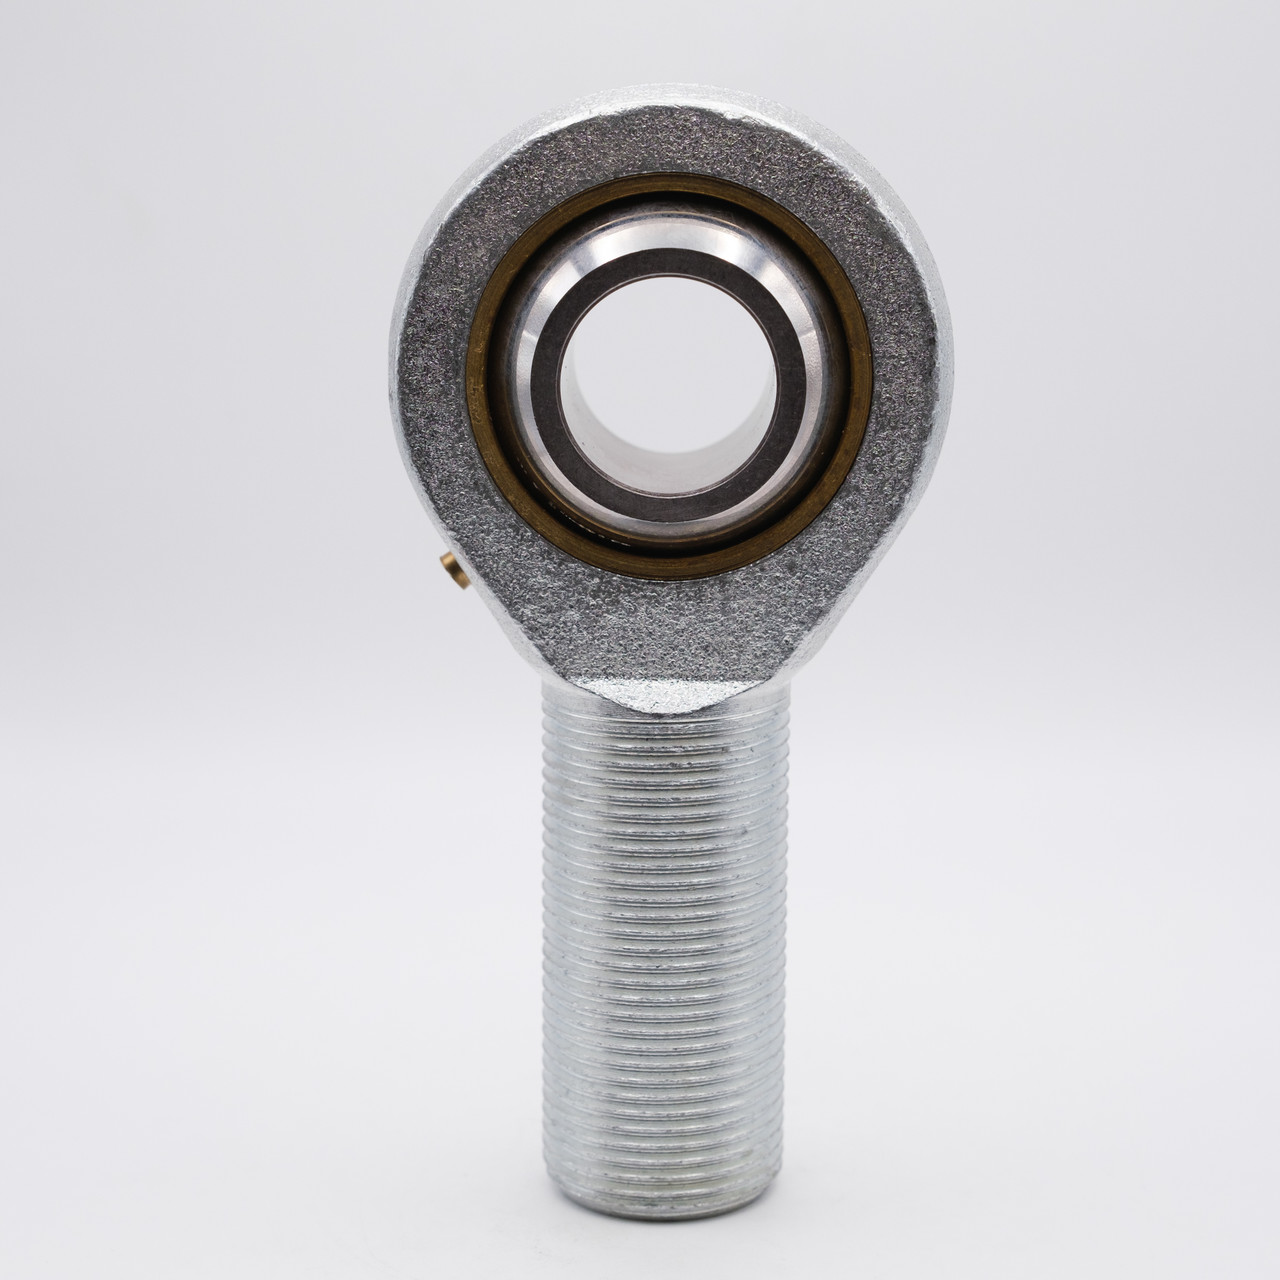 POS10 Rod-End Bearing 10mm Bore Front View